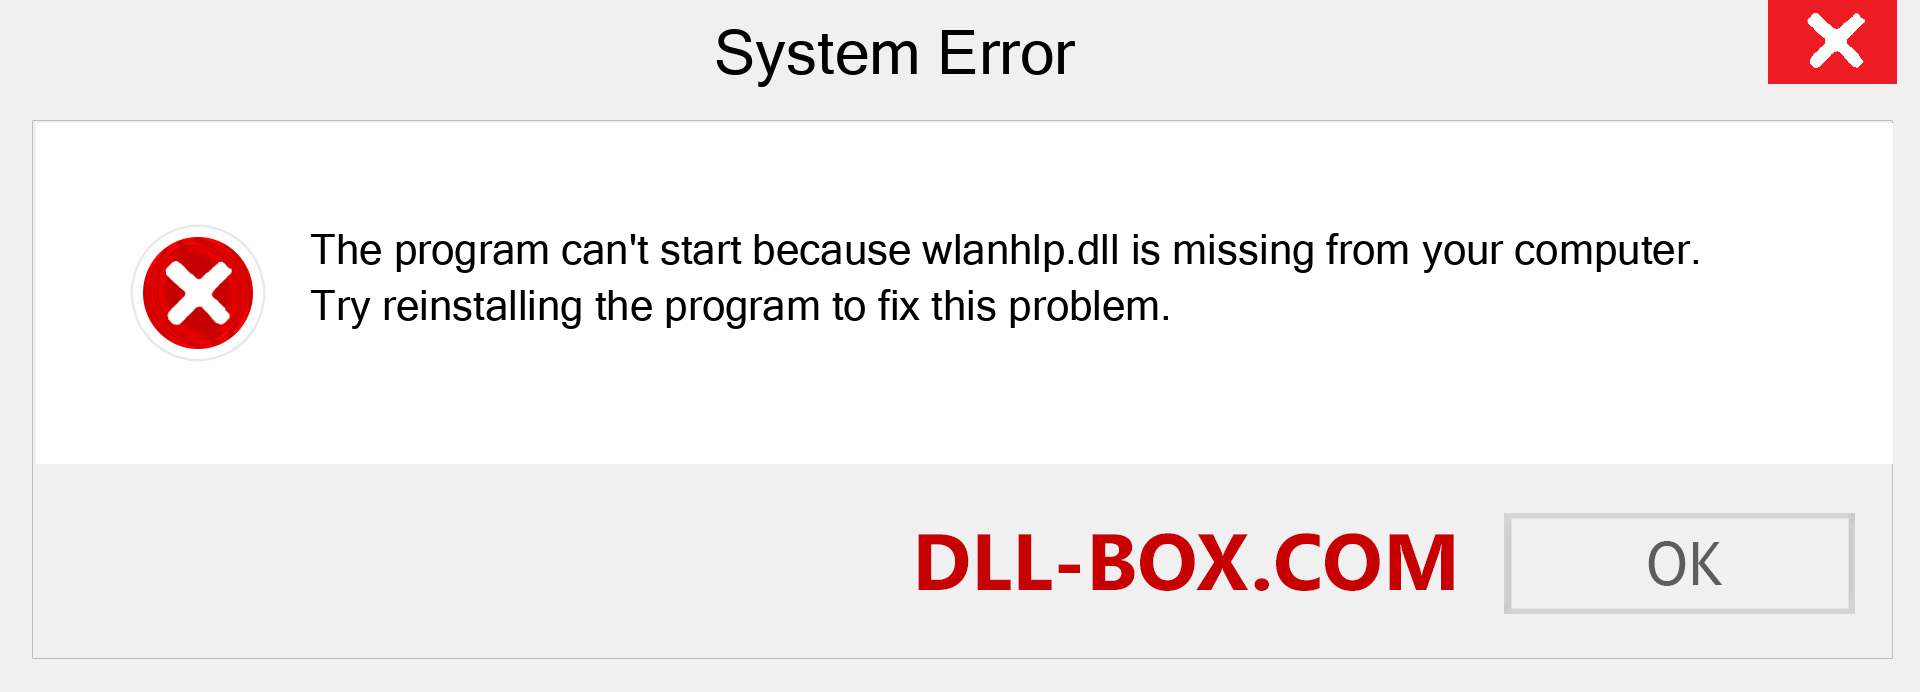  wlanhlp.dll file is missing?. Download for Windows 7, 8, 10 - Fix  wlanhlp dll Missing Error on Windows, photos, images